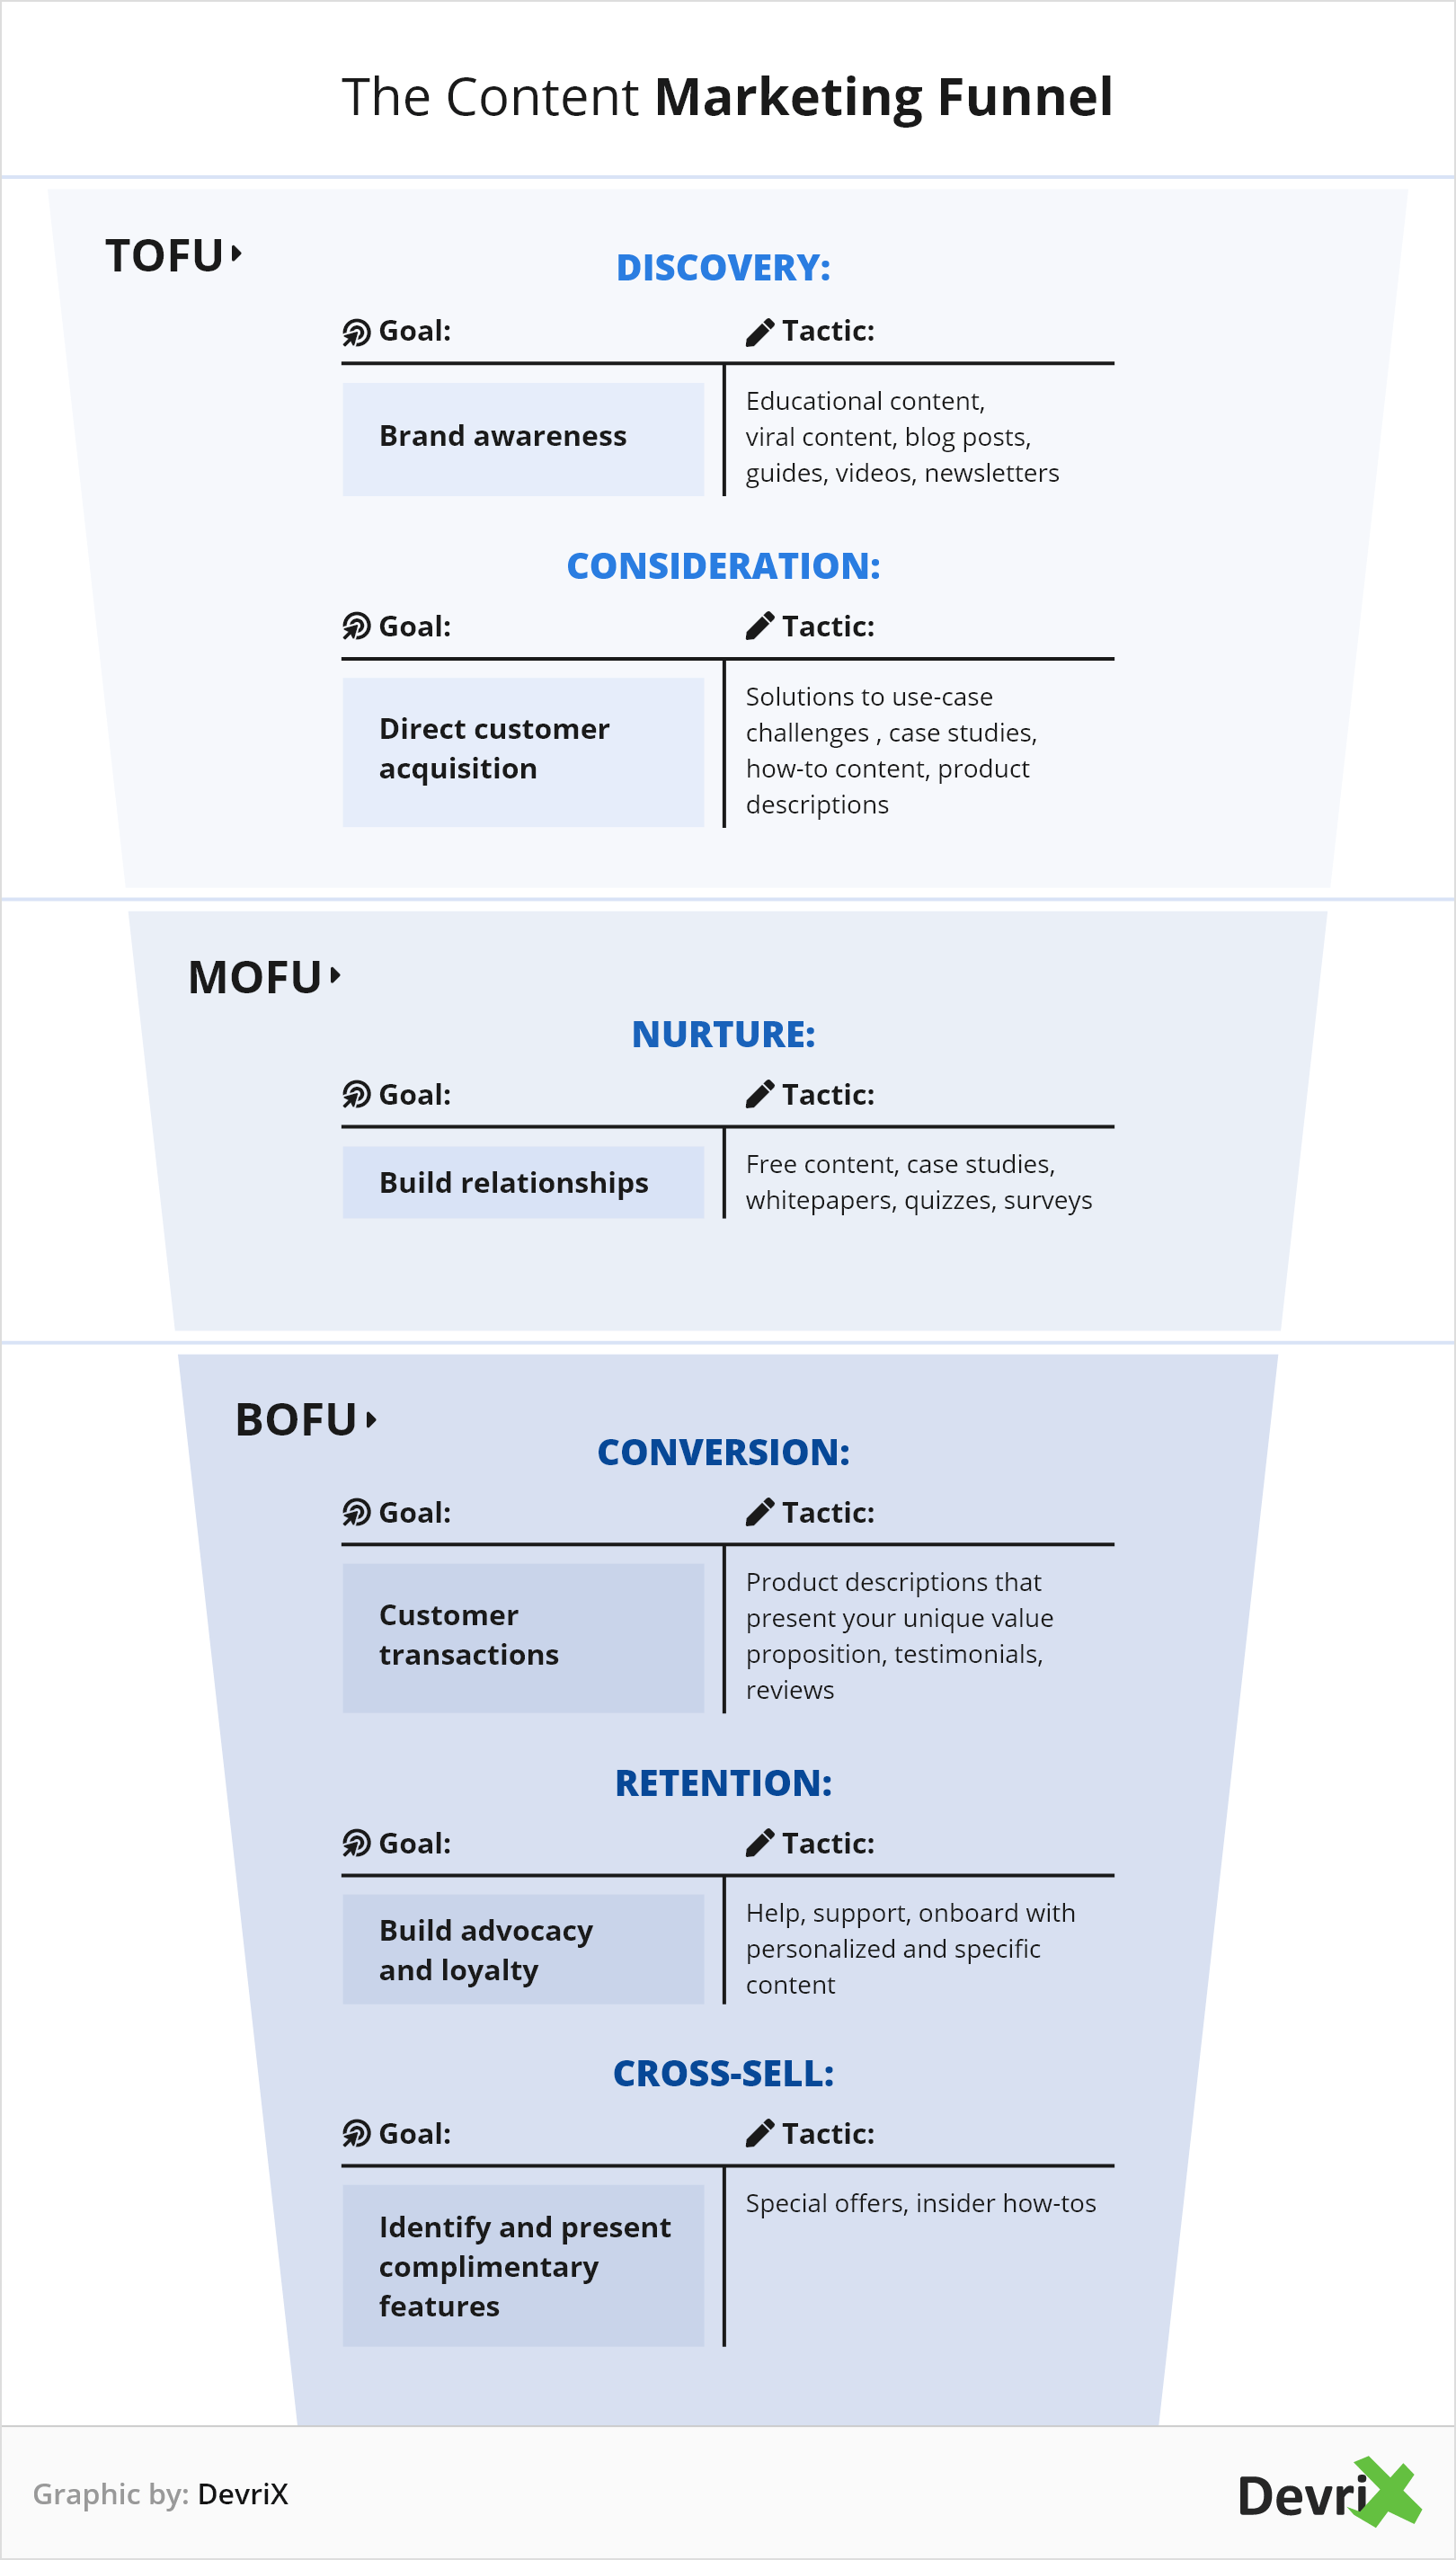 The Content Marketing Funnel